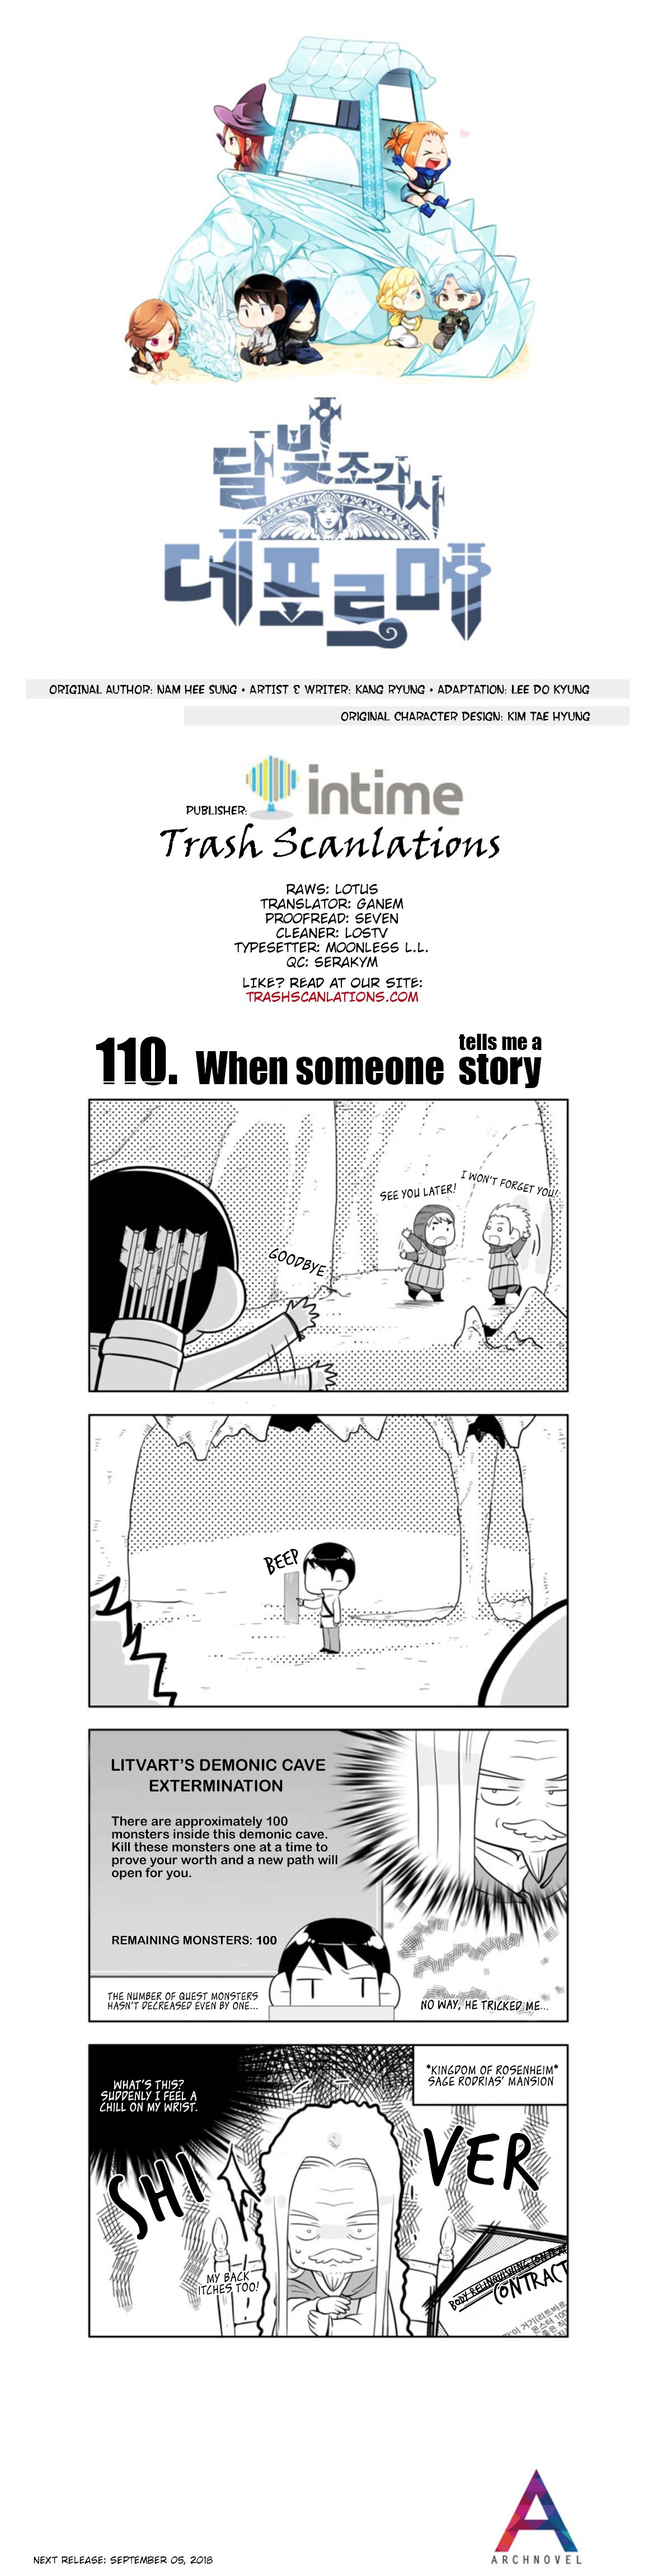 Moonlight Sculptor 4 koma Ch. 110 When someone tells me a story